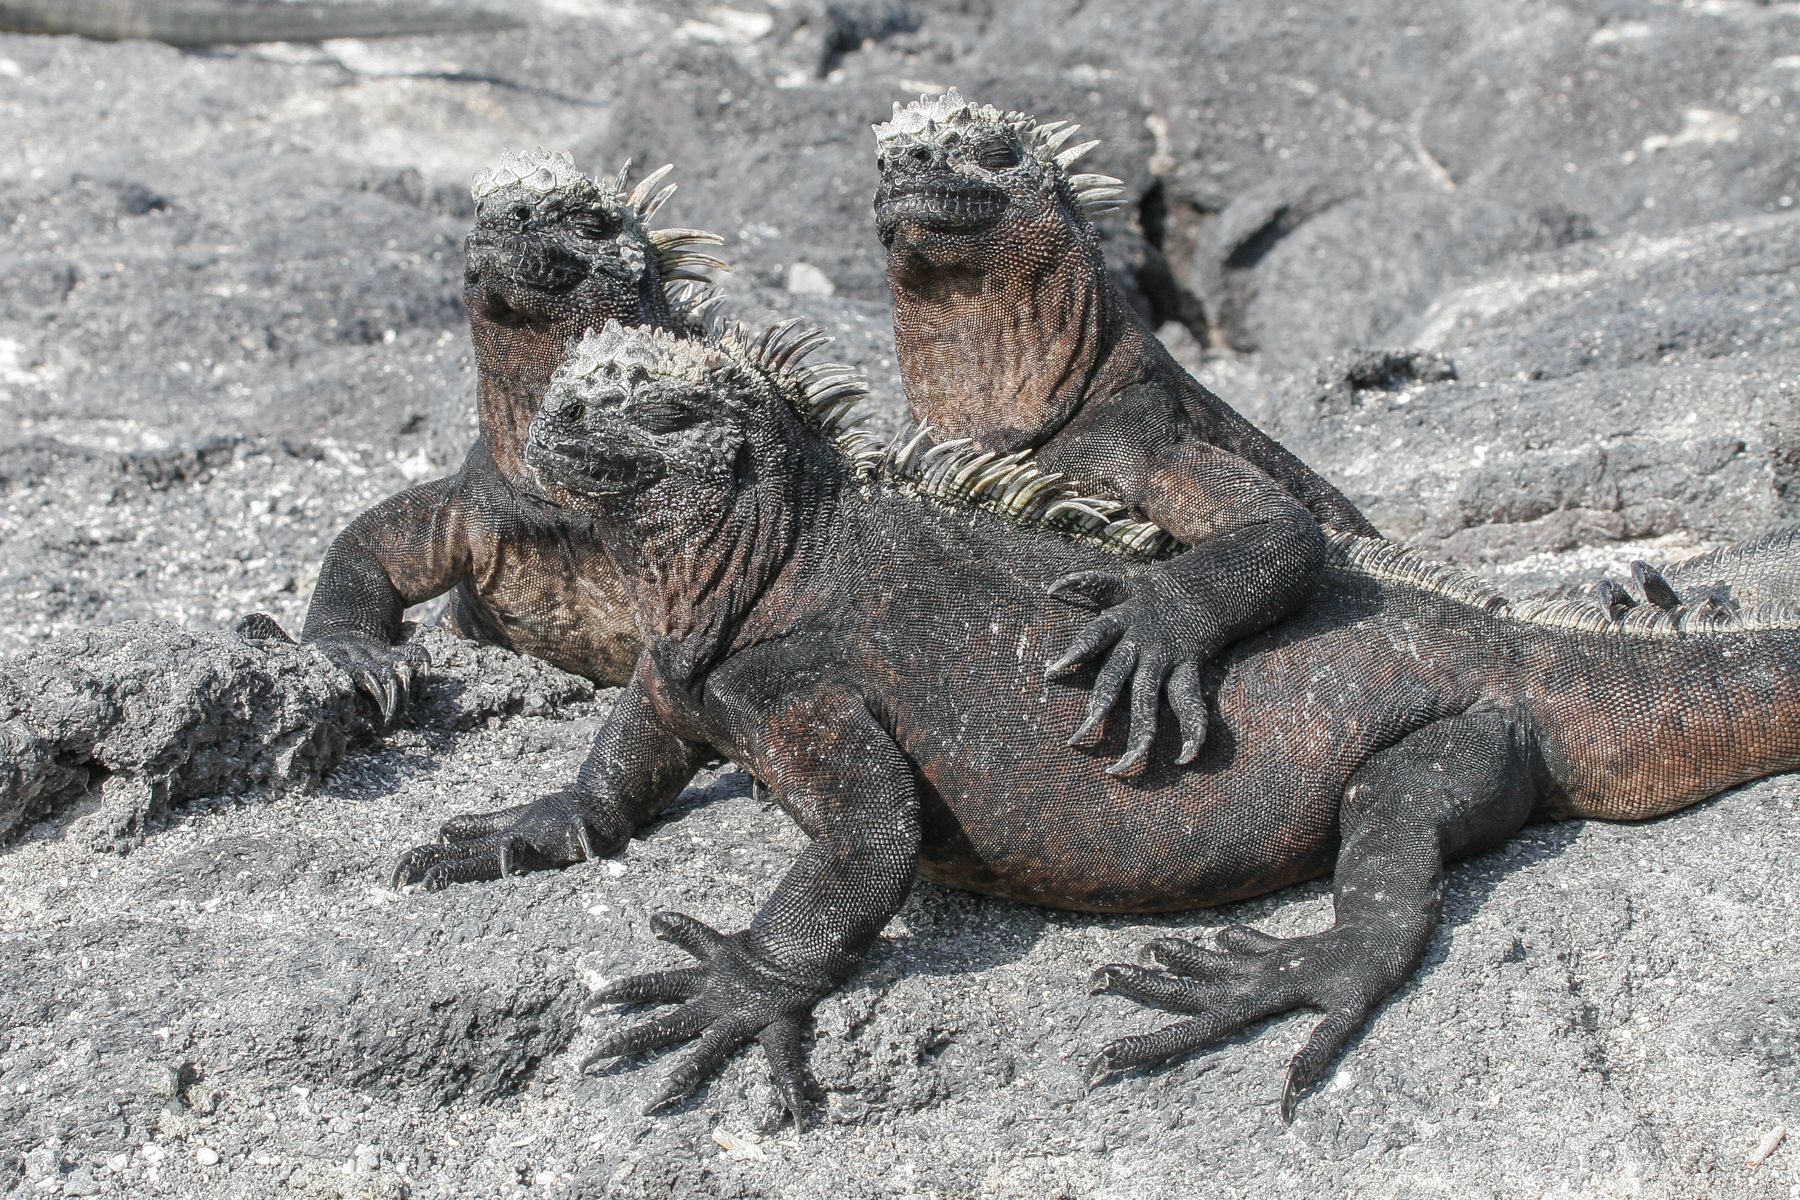 The most iconic creature of Galapagos must surely be the prehistoric-looking Marine Iguana